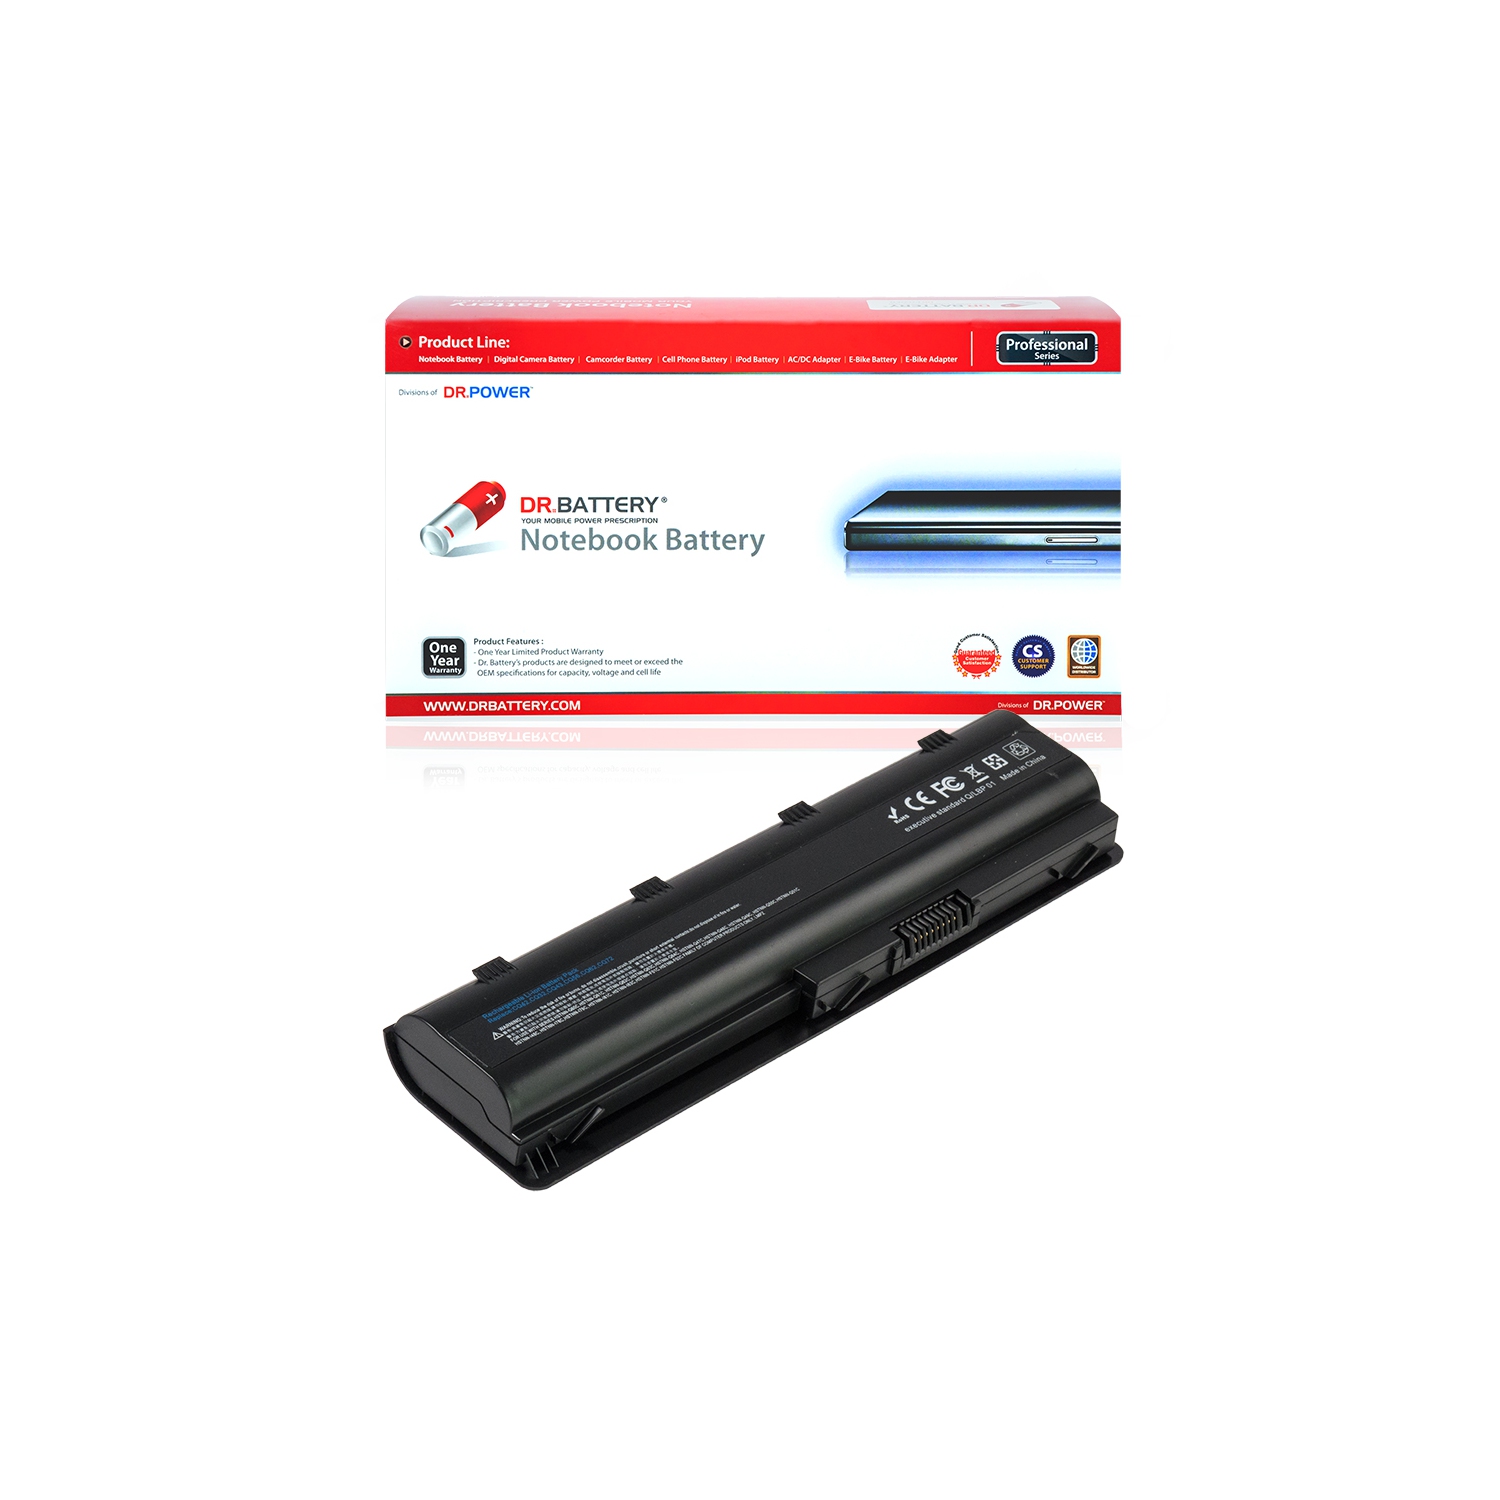 DR. BATTERY - Replacement for HP 2000 / 630 / 635 / ENVY 17 / G62 / G72 / 593550-001 / 593553-001 / 593554-001 / 593562-001